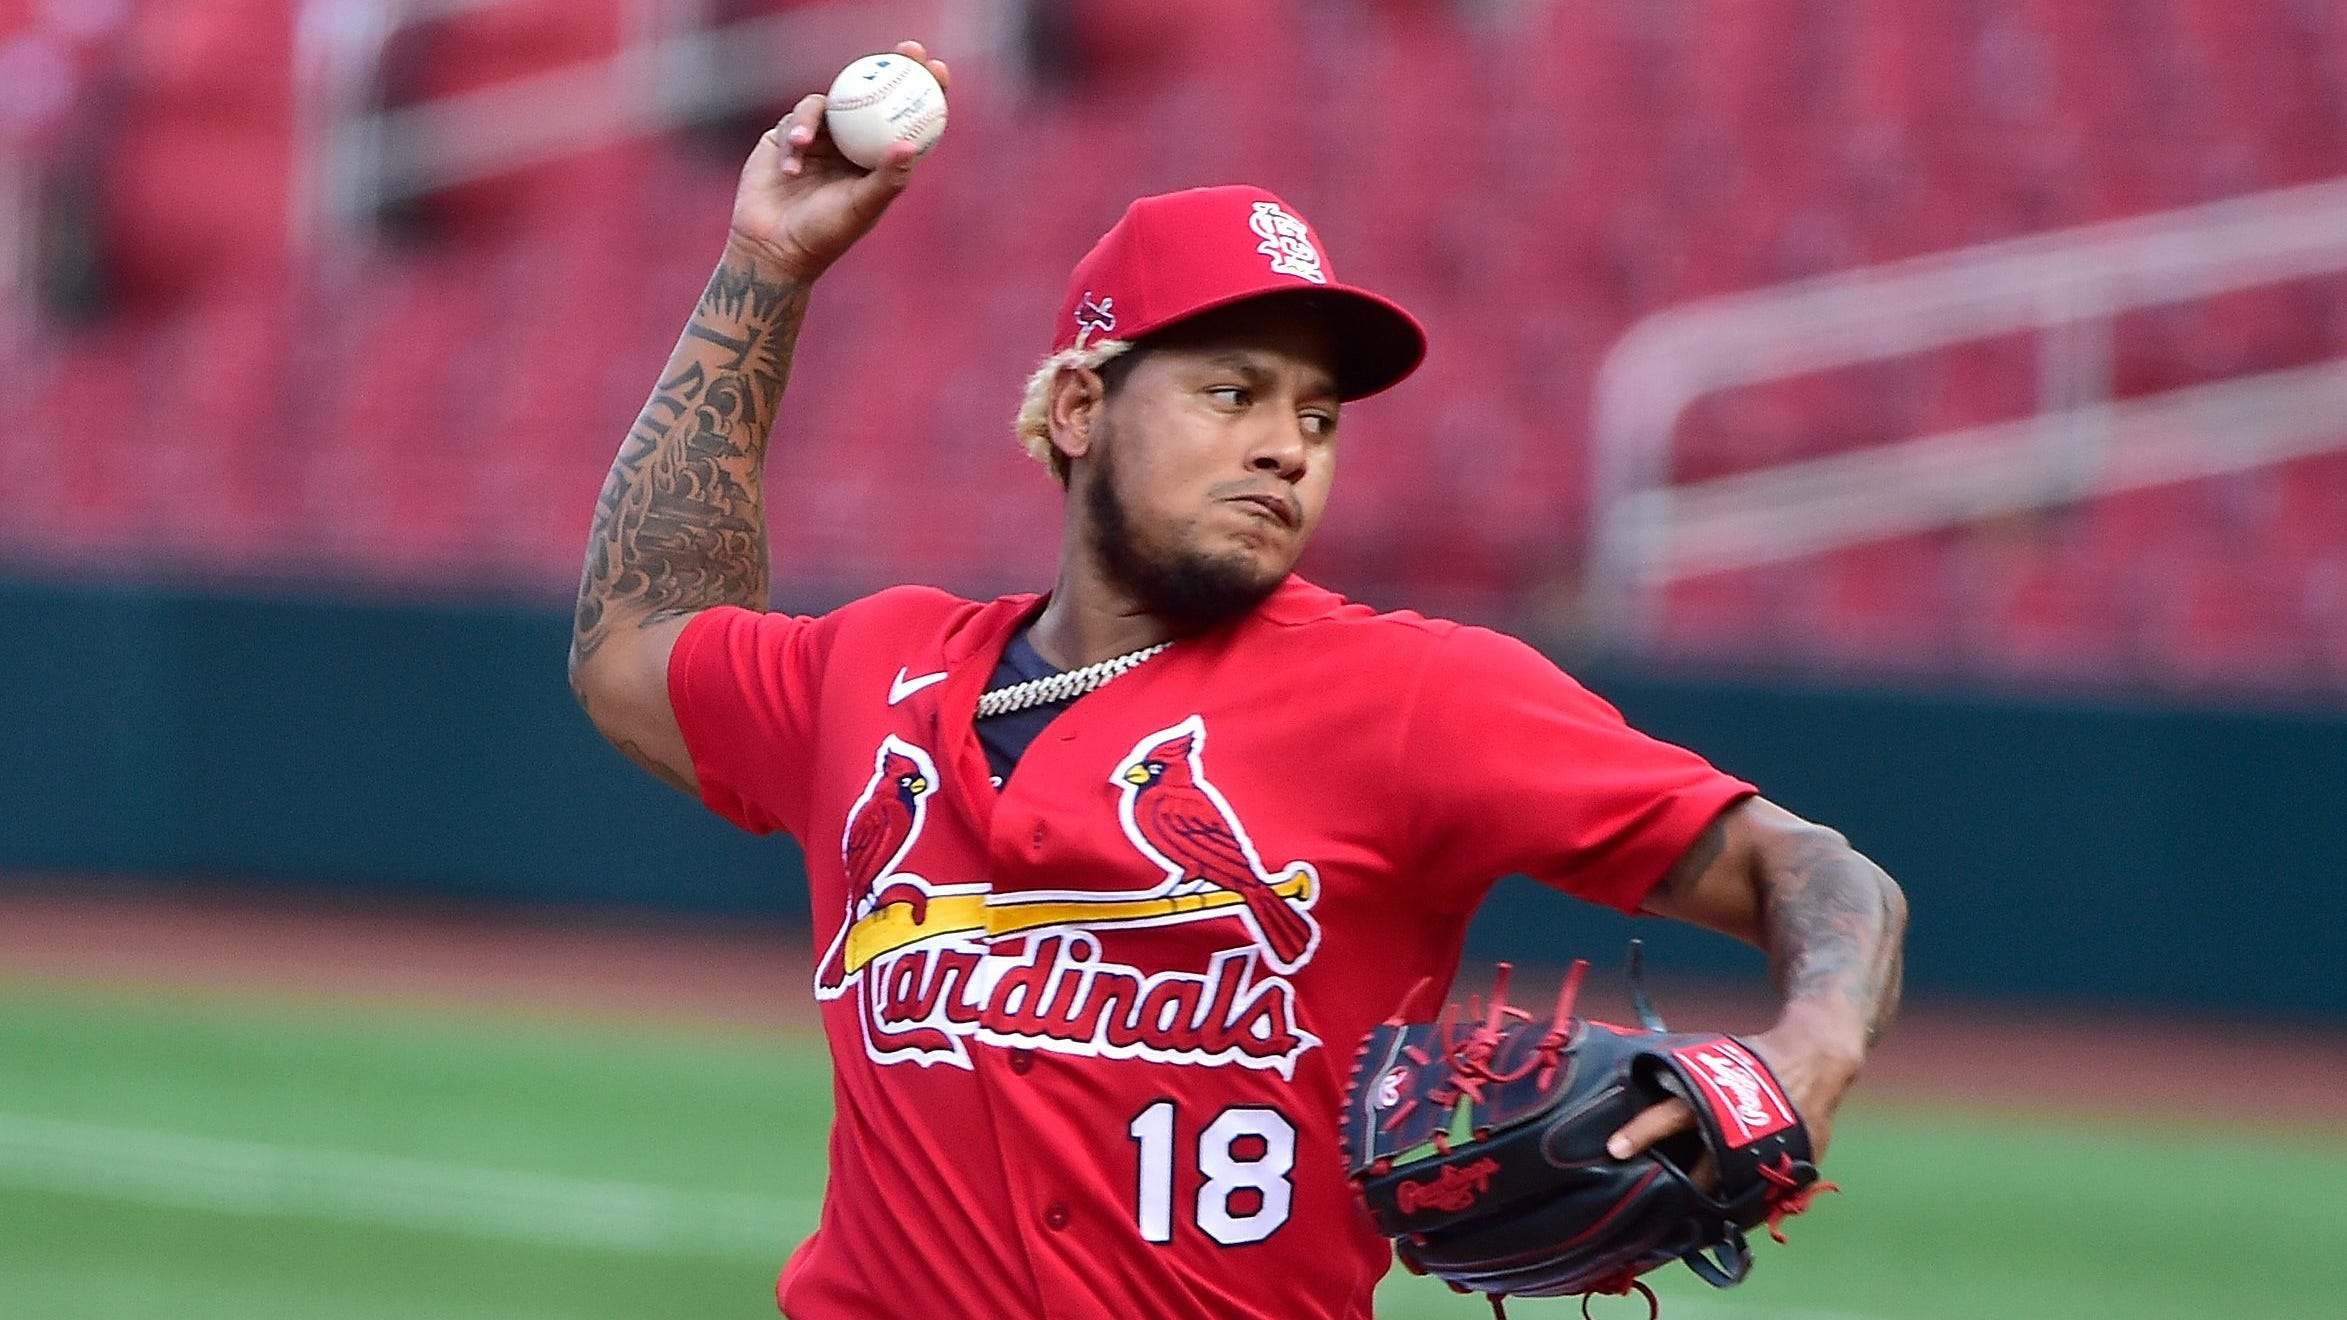 St. Louis Cardinals at Minnesota Twins odds, picks and best bets